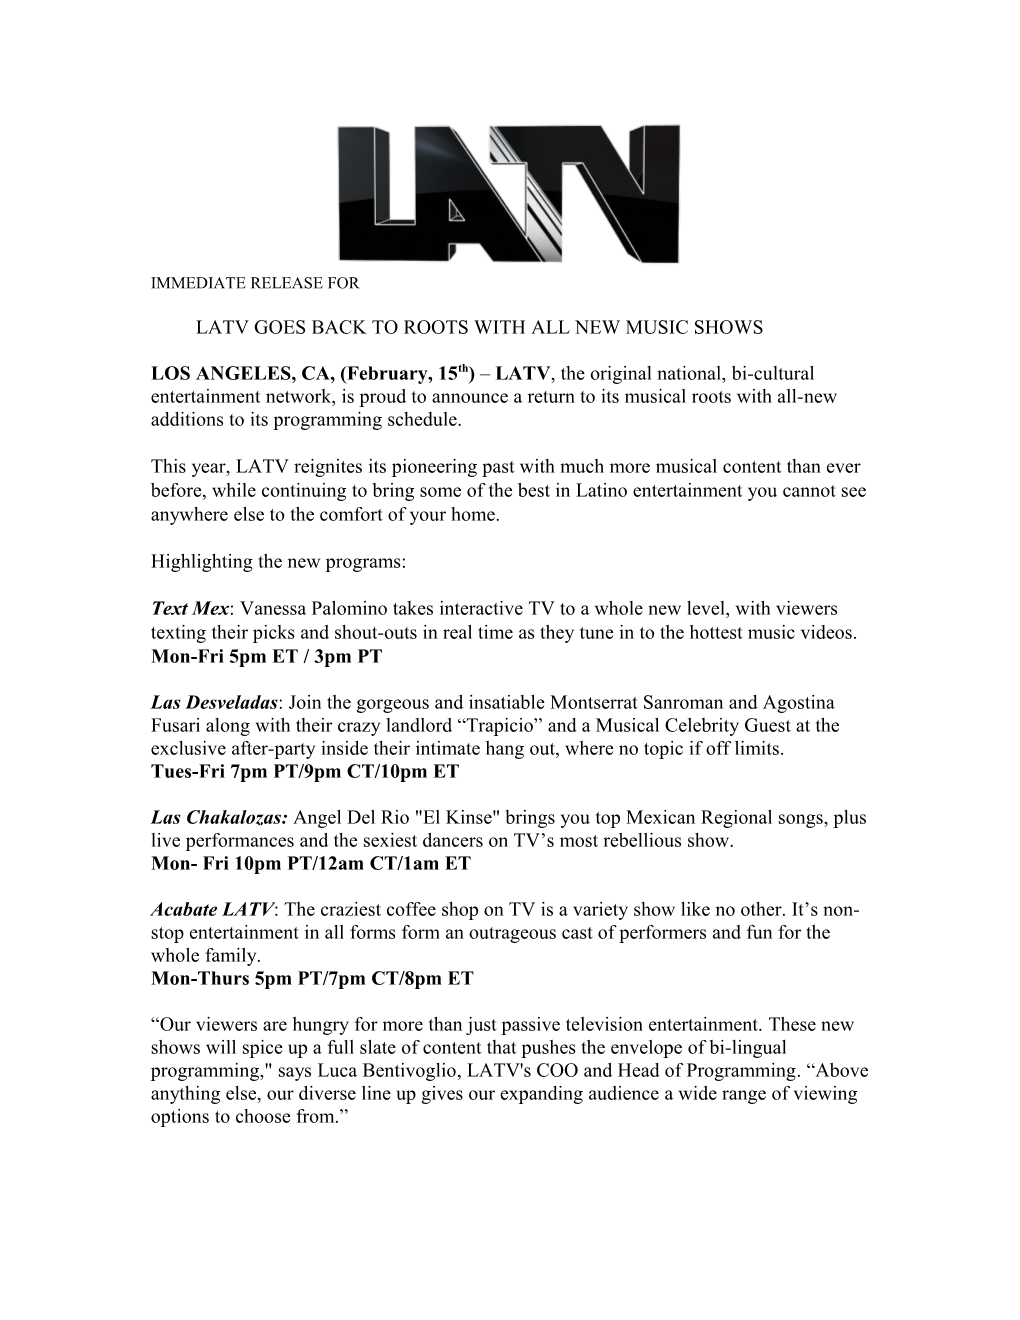 Latv Goes Back to Roots Withall New Music Shows